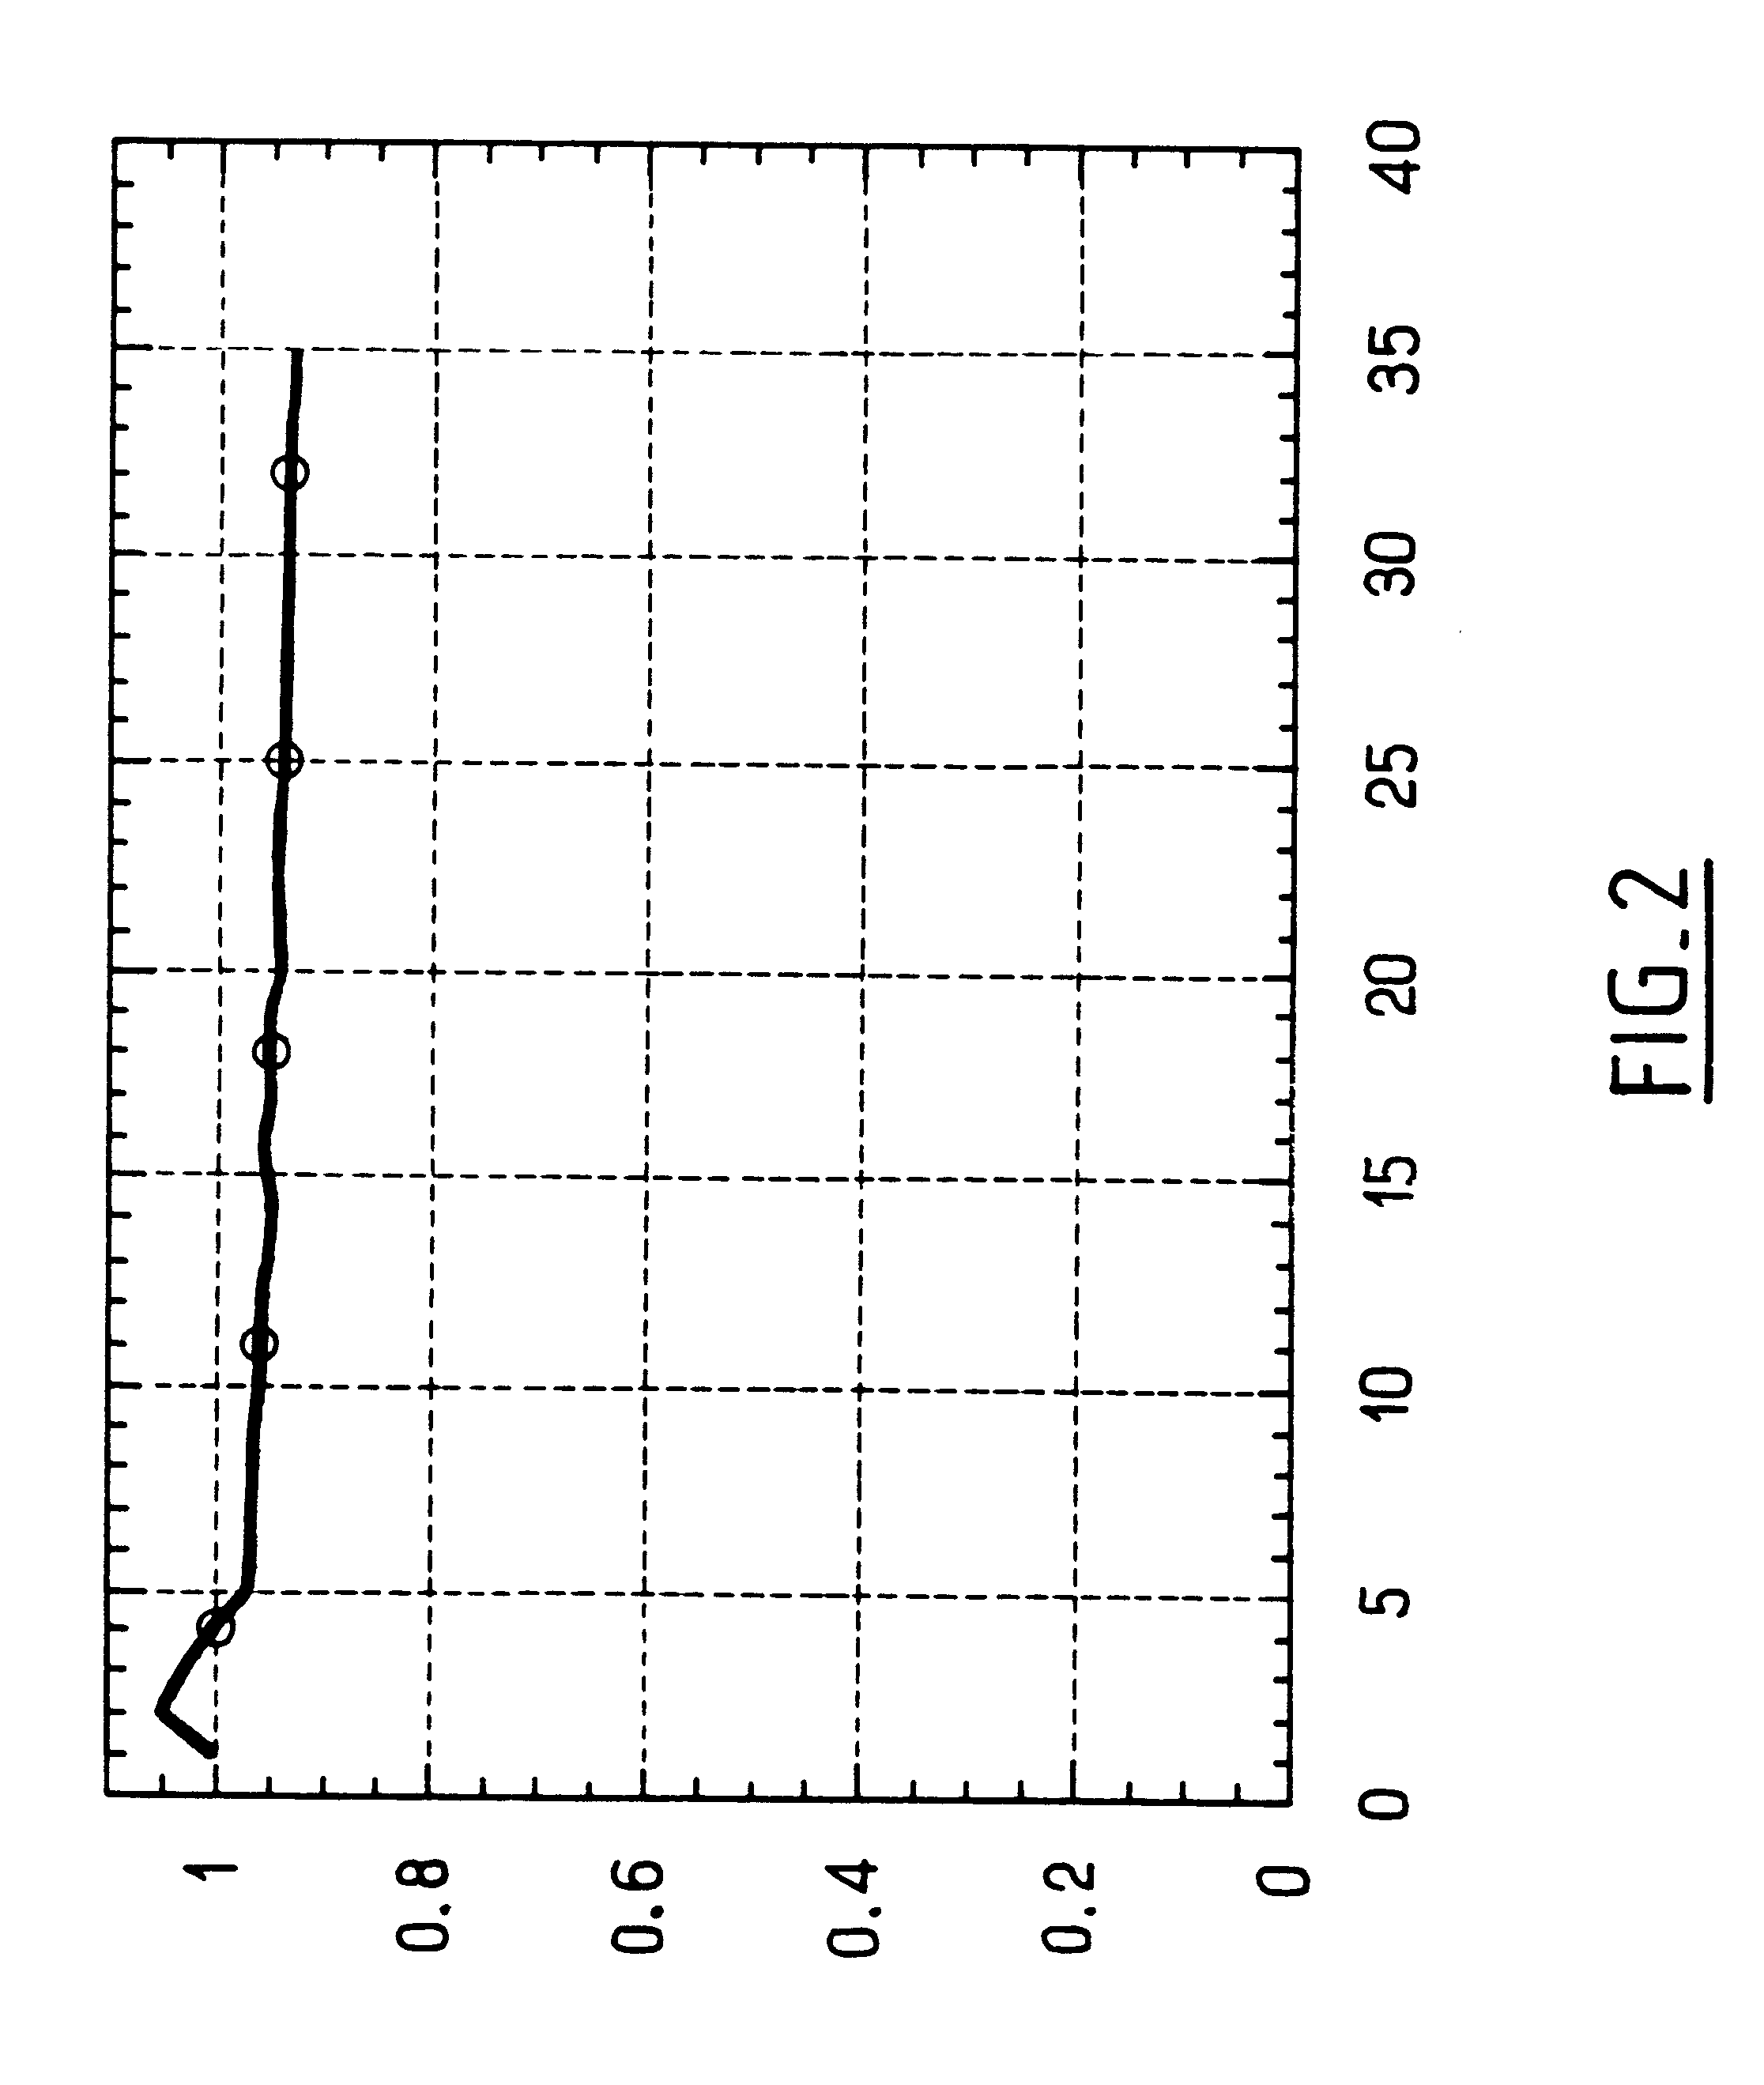 Process for producing an electrolytic cell having a polymeric separator